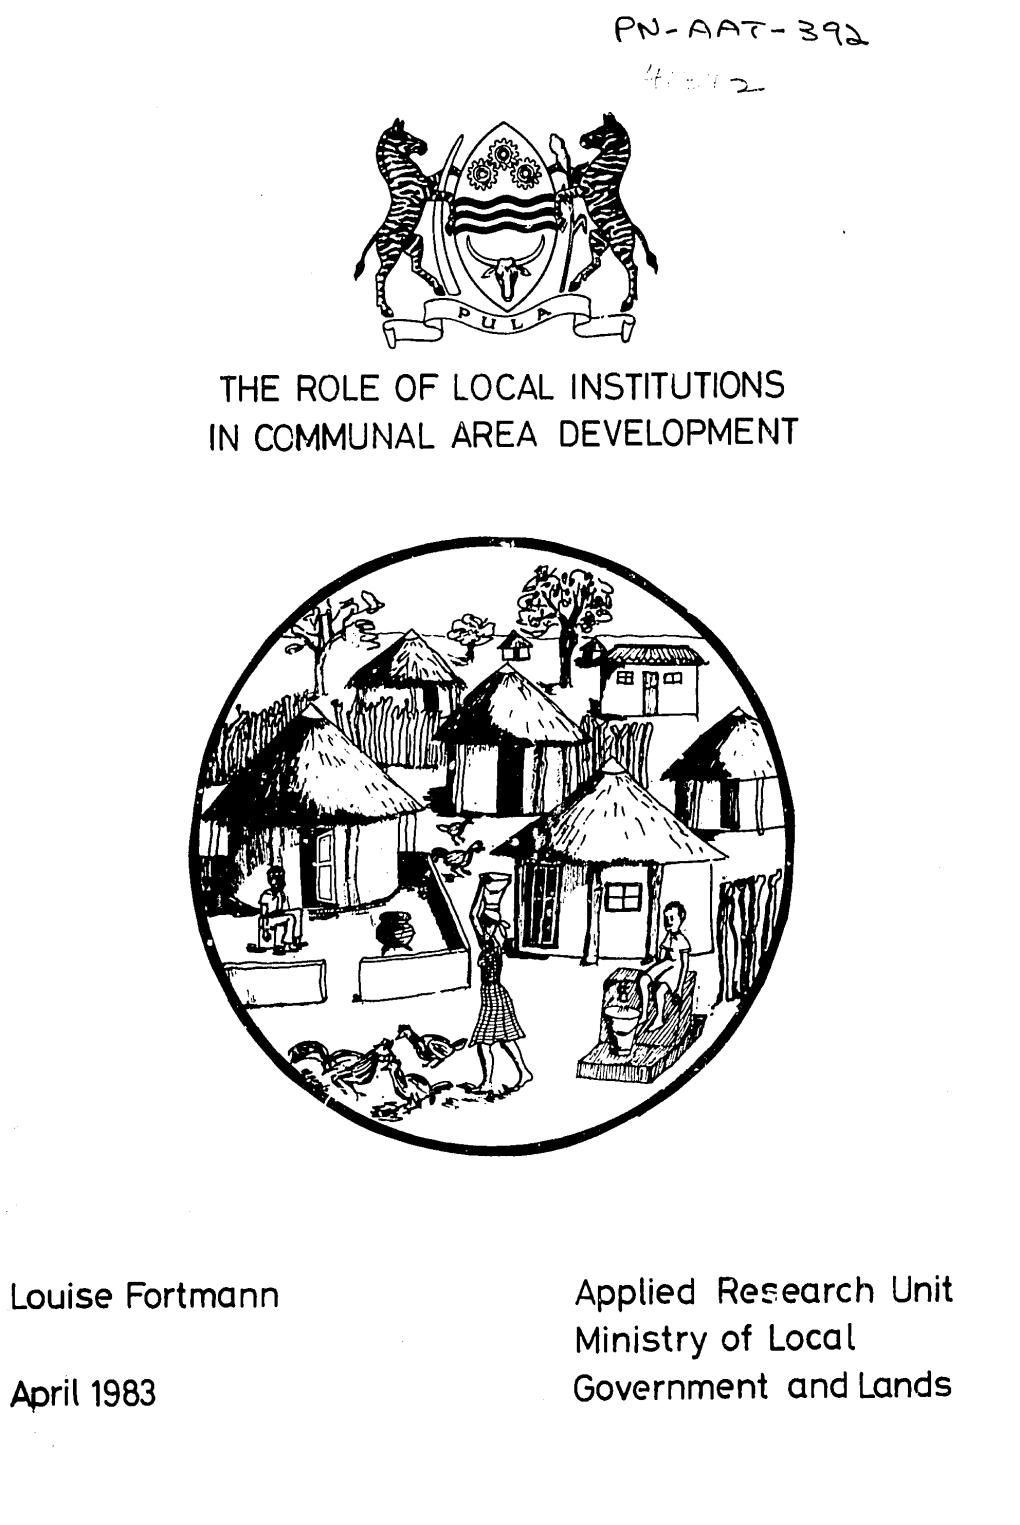 The Role of Local Institutions in Communal Area Development